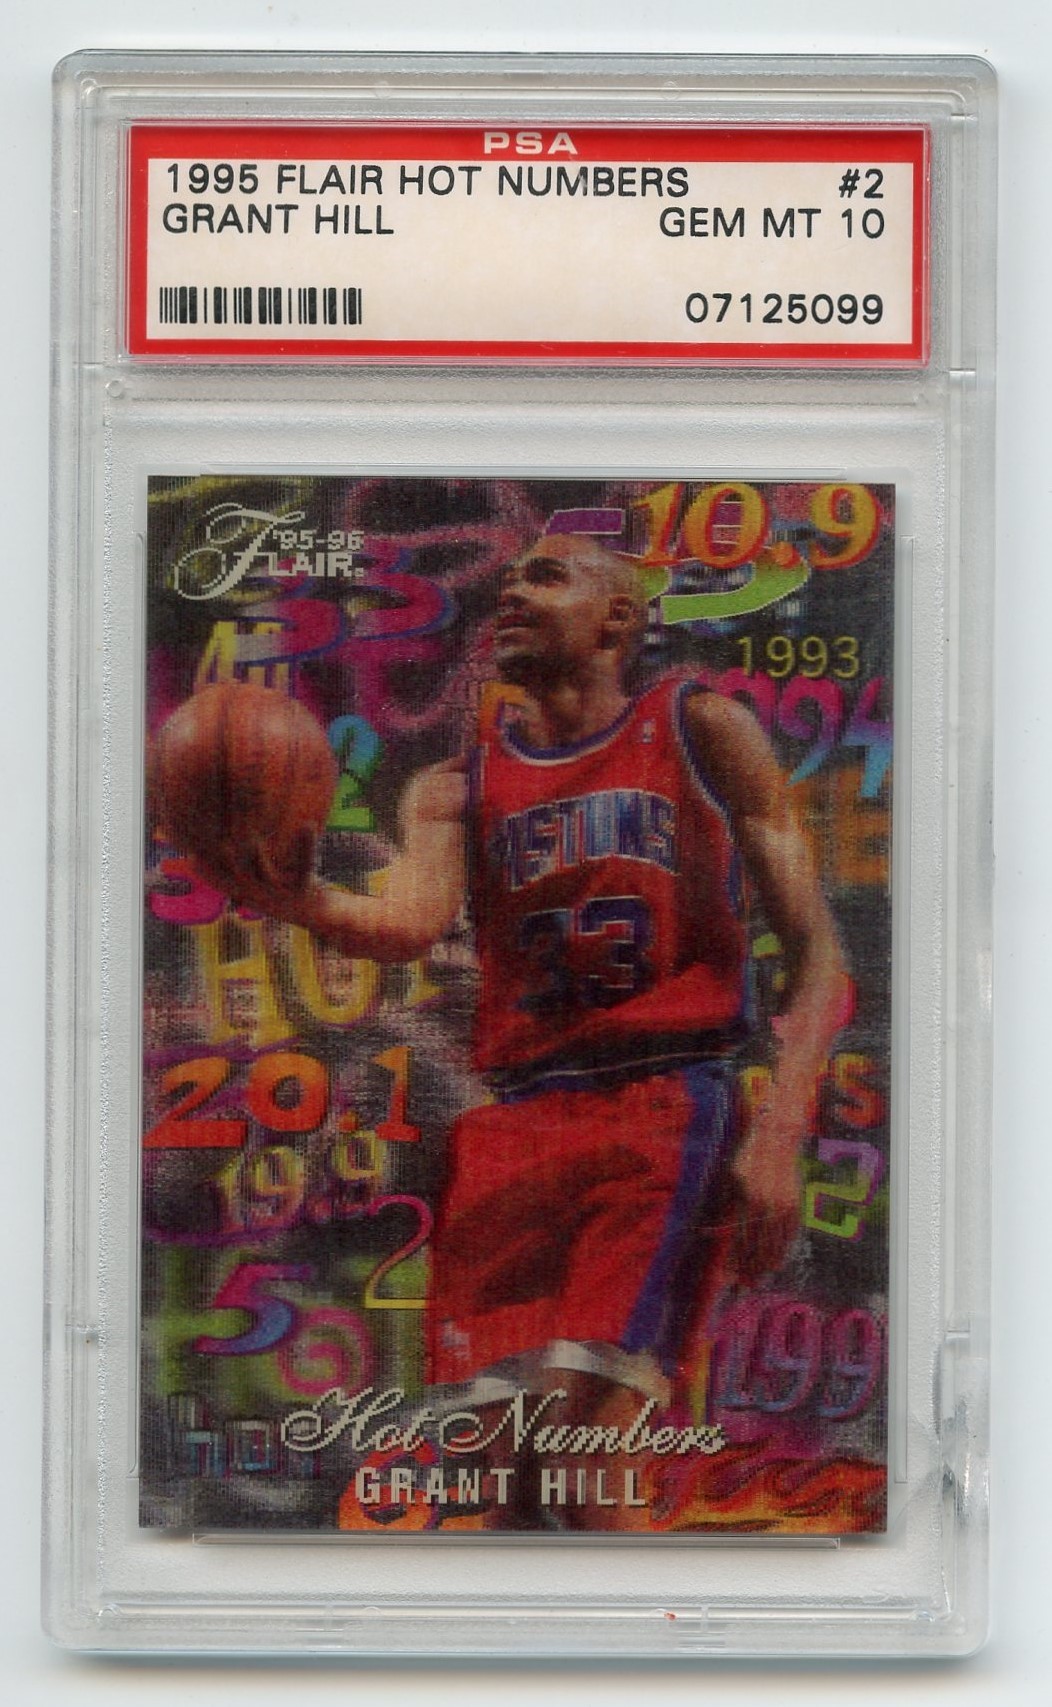 1995 Flair Hot Numbers Grant Hill PSA 10